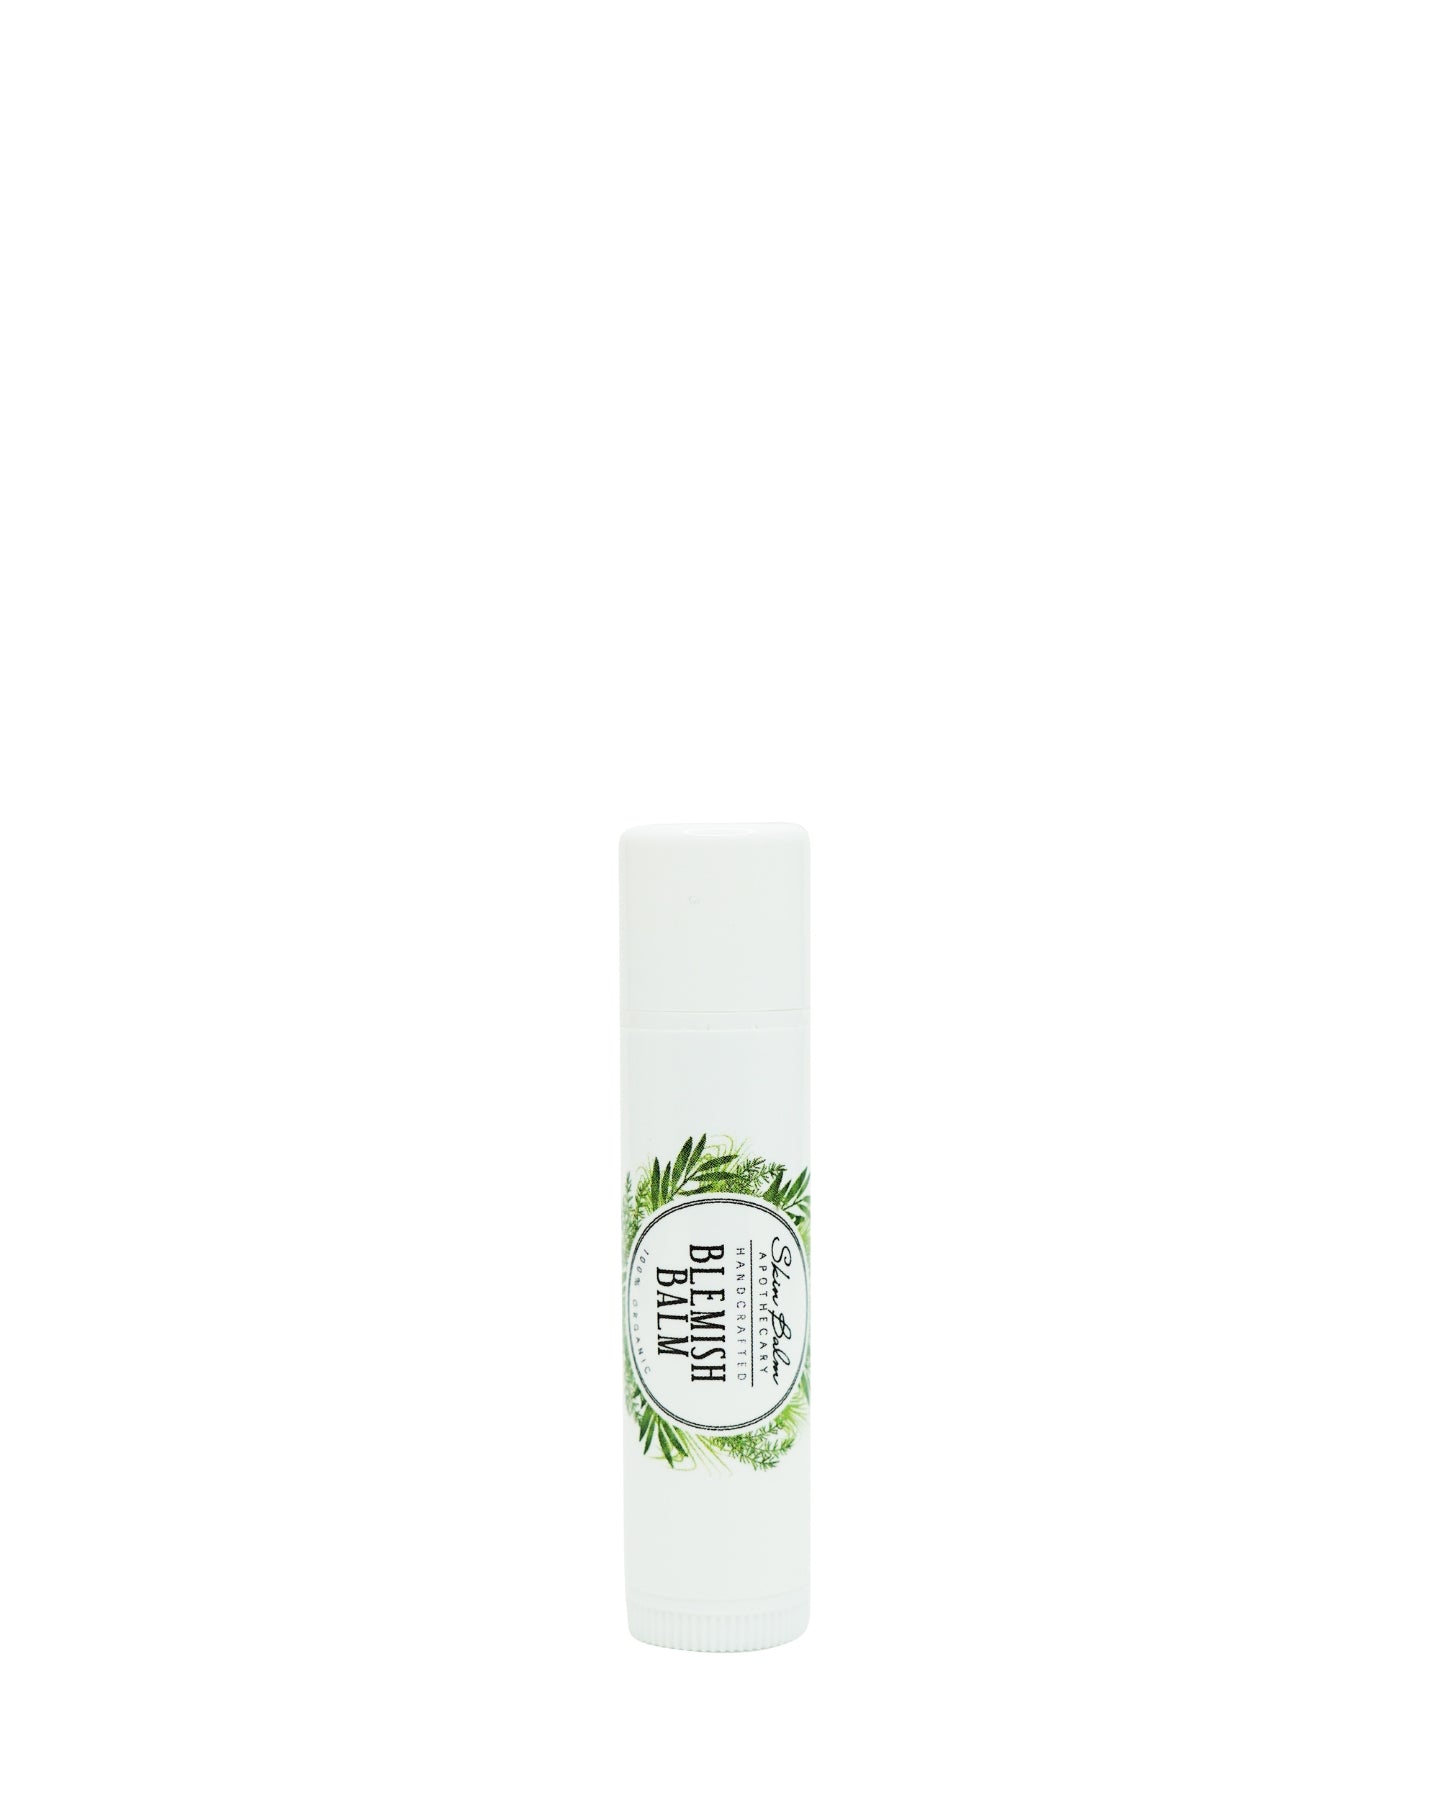 Blemish Balm against a white background.